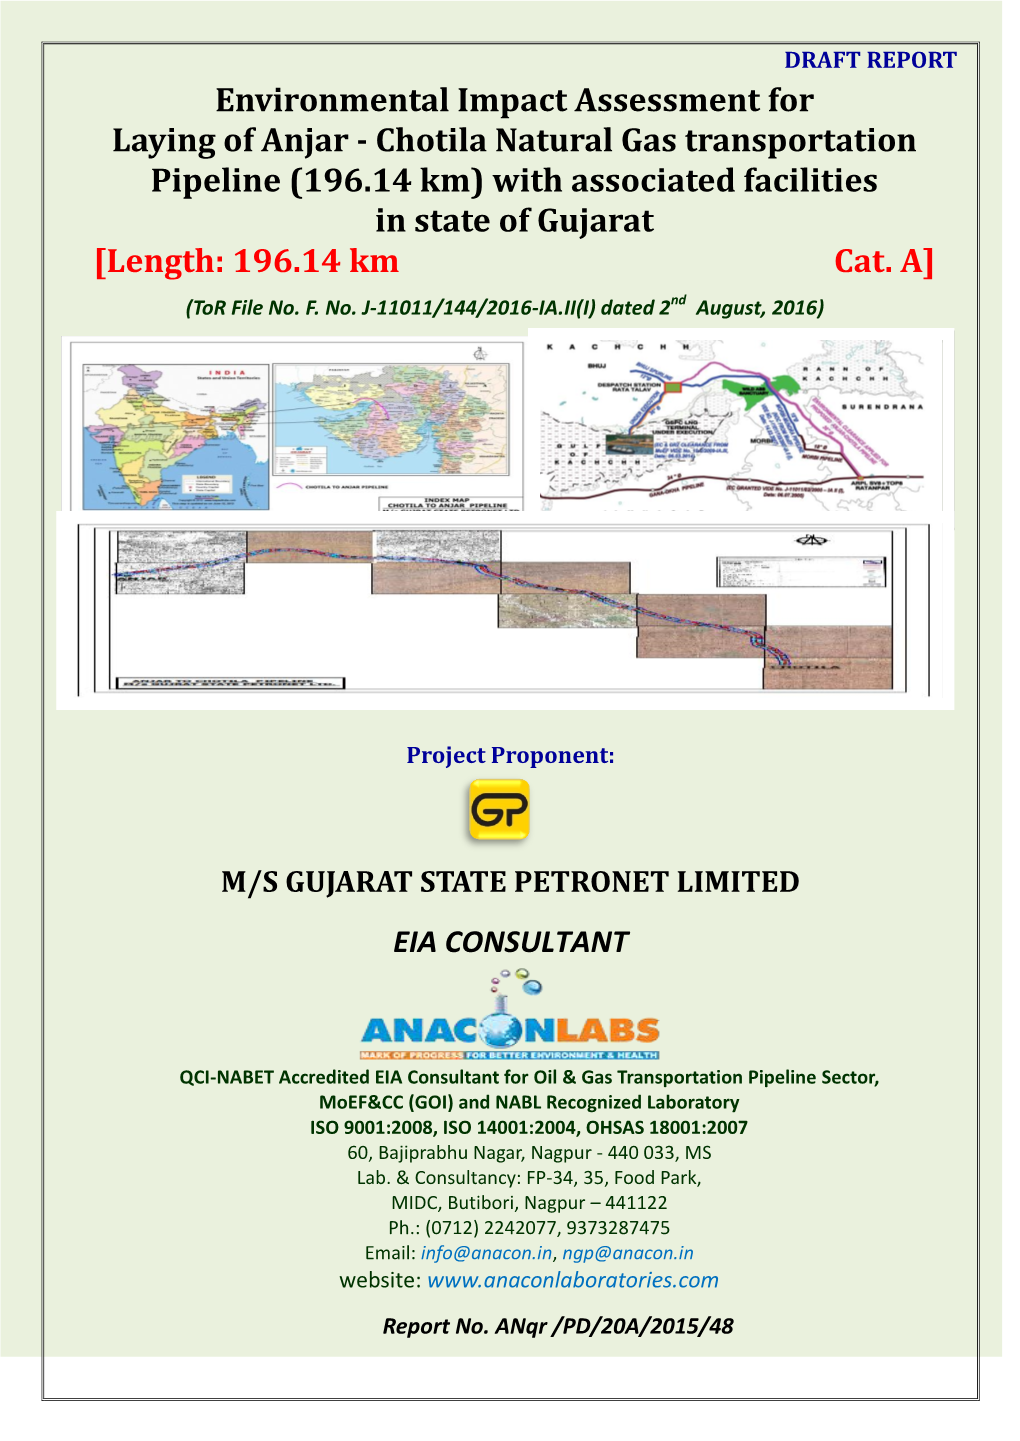 Environmental Impact Assessment for Laying of Anjar - Chotila Natural Gas Transportation Pipeline (196.14 Km) with Associated Facilities